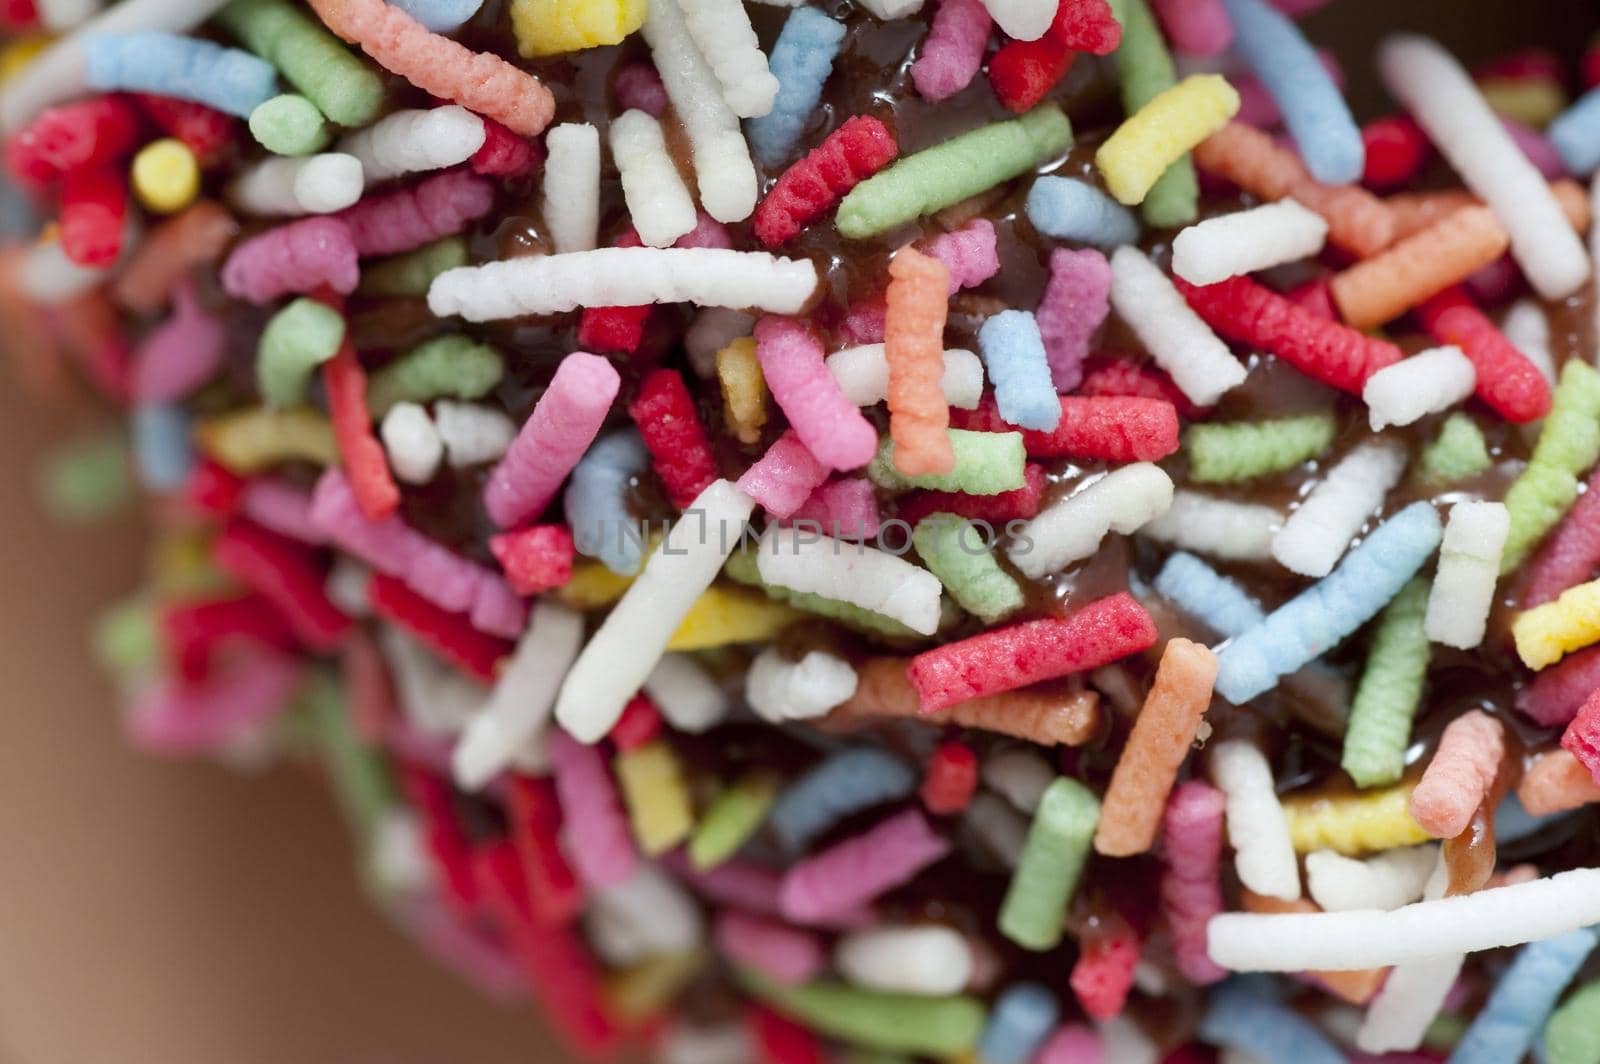 Background texture of multicolored sprinkles on a chocolate glazed doughnut